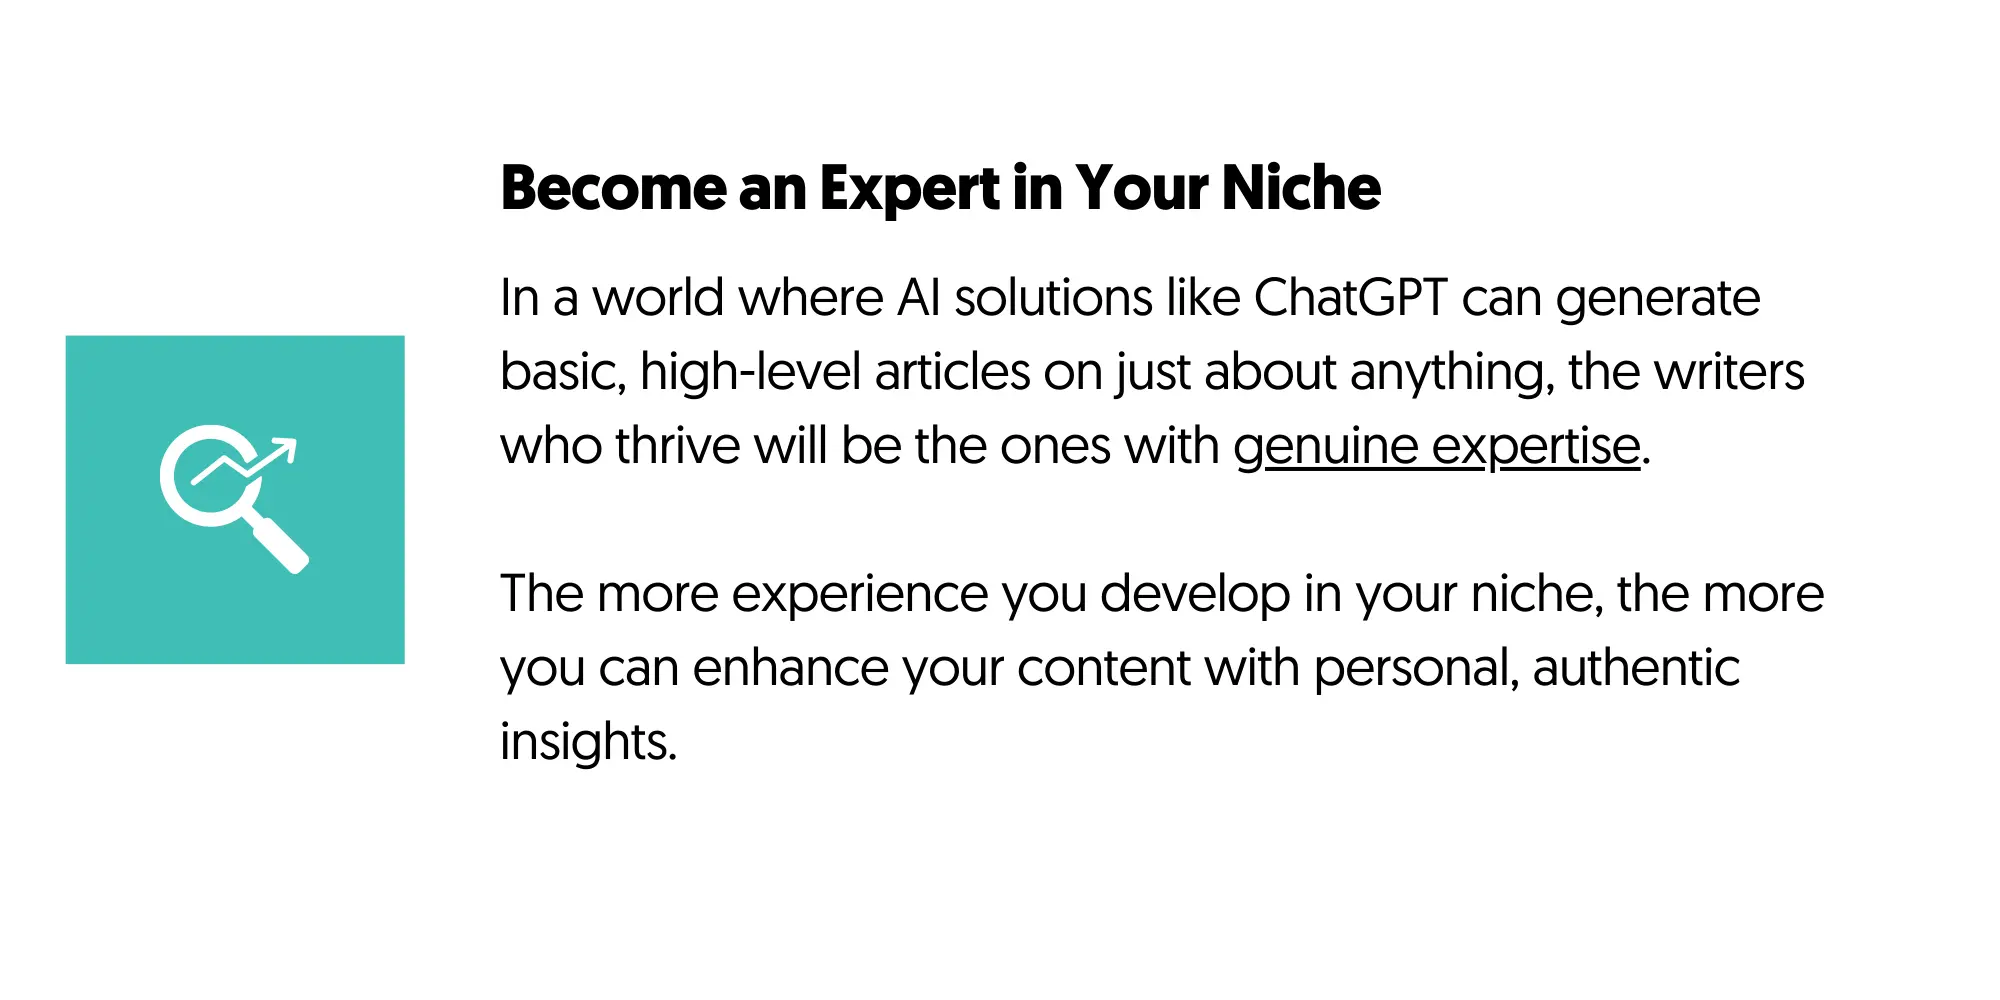 Build Expertise and become an expert in your niche.